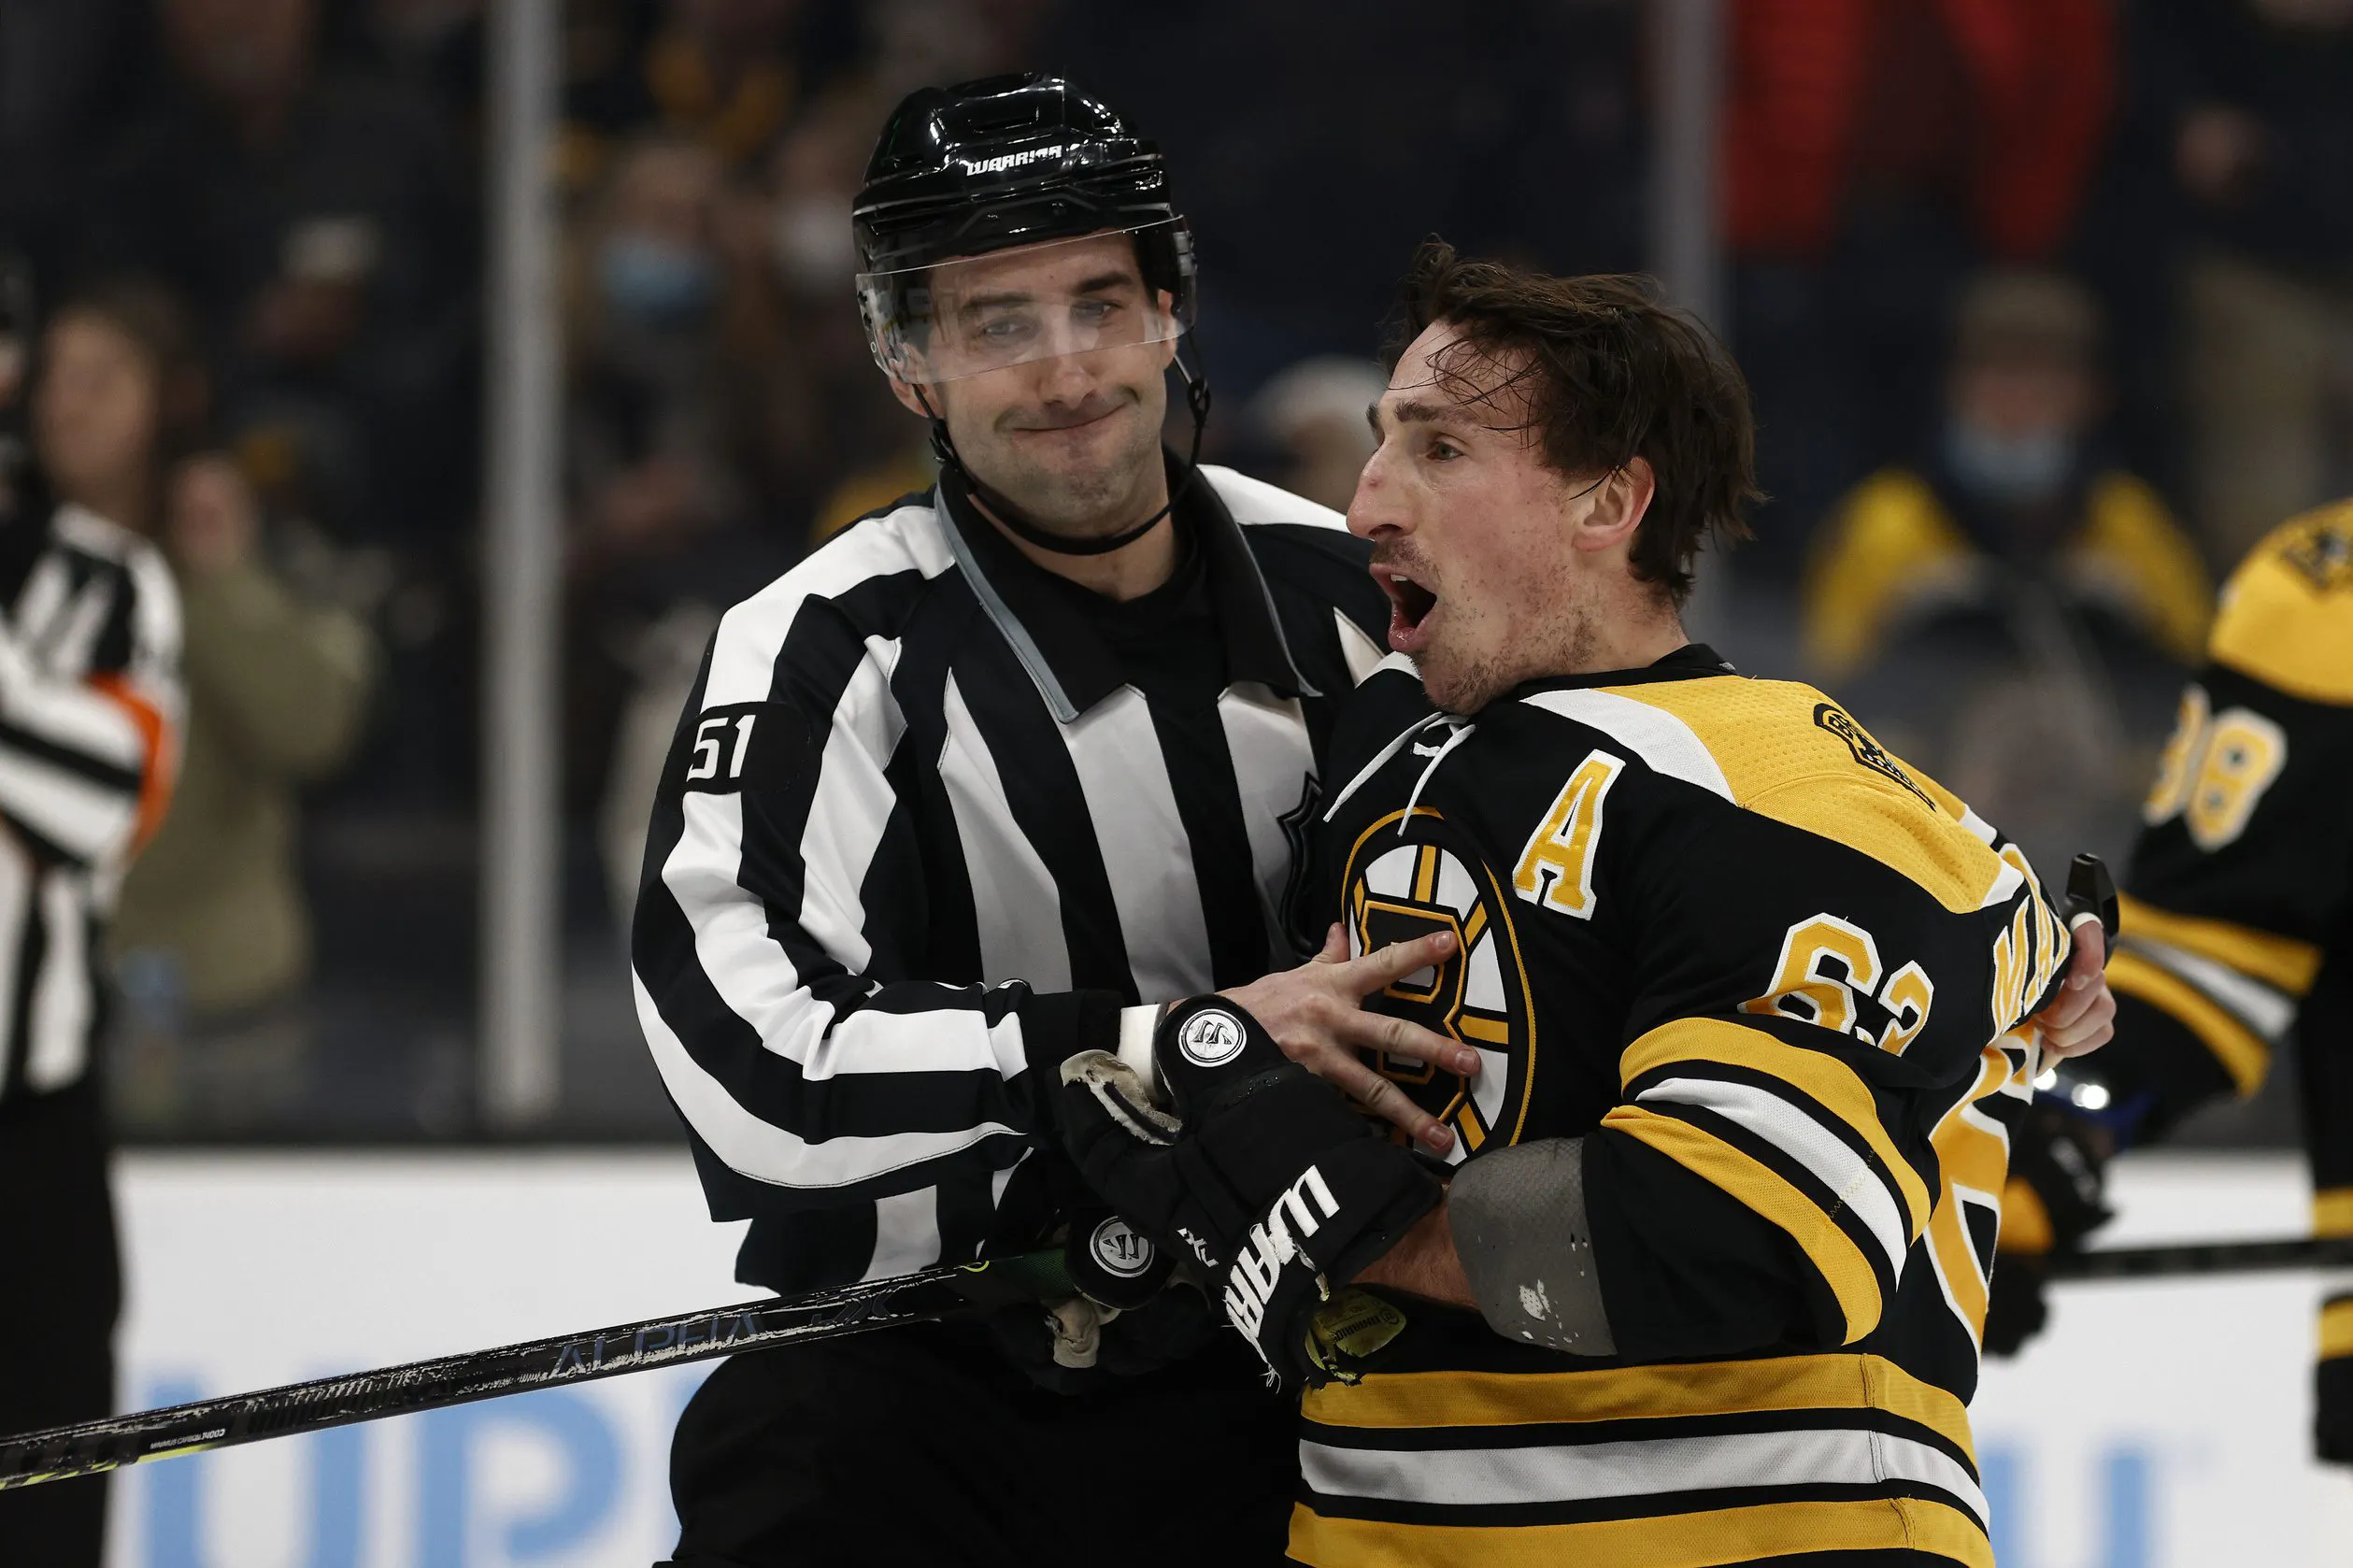 Brad Marchand has been offered an in-person hearing for hit on Tristan Jarry